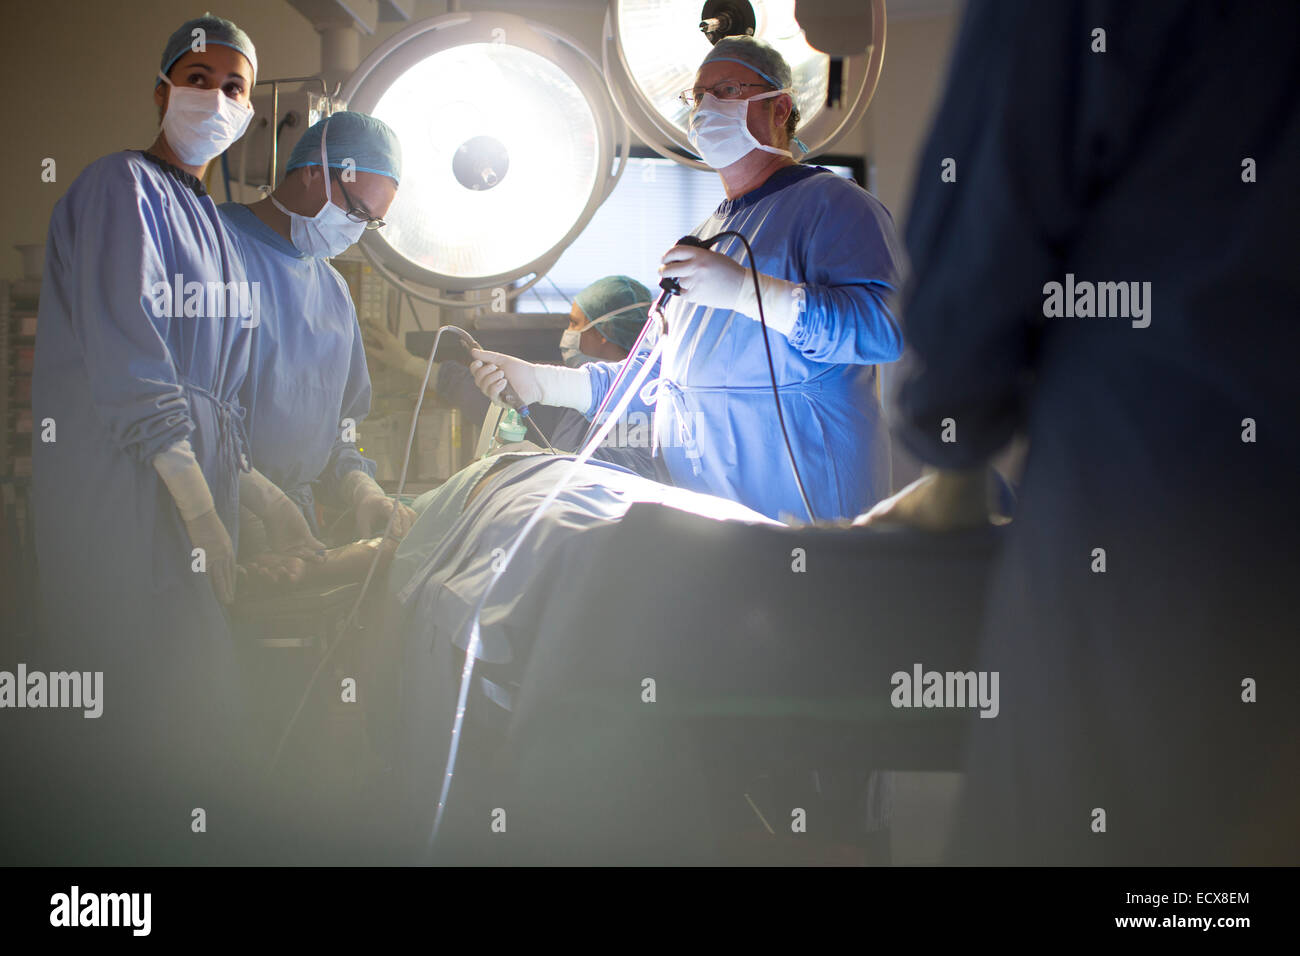 Team of doctors performing laparoscopic surgery in operating theater Stock Photo